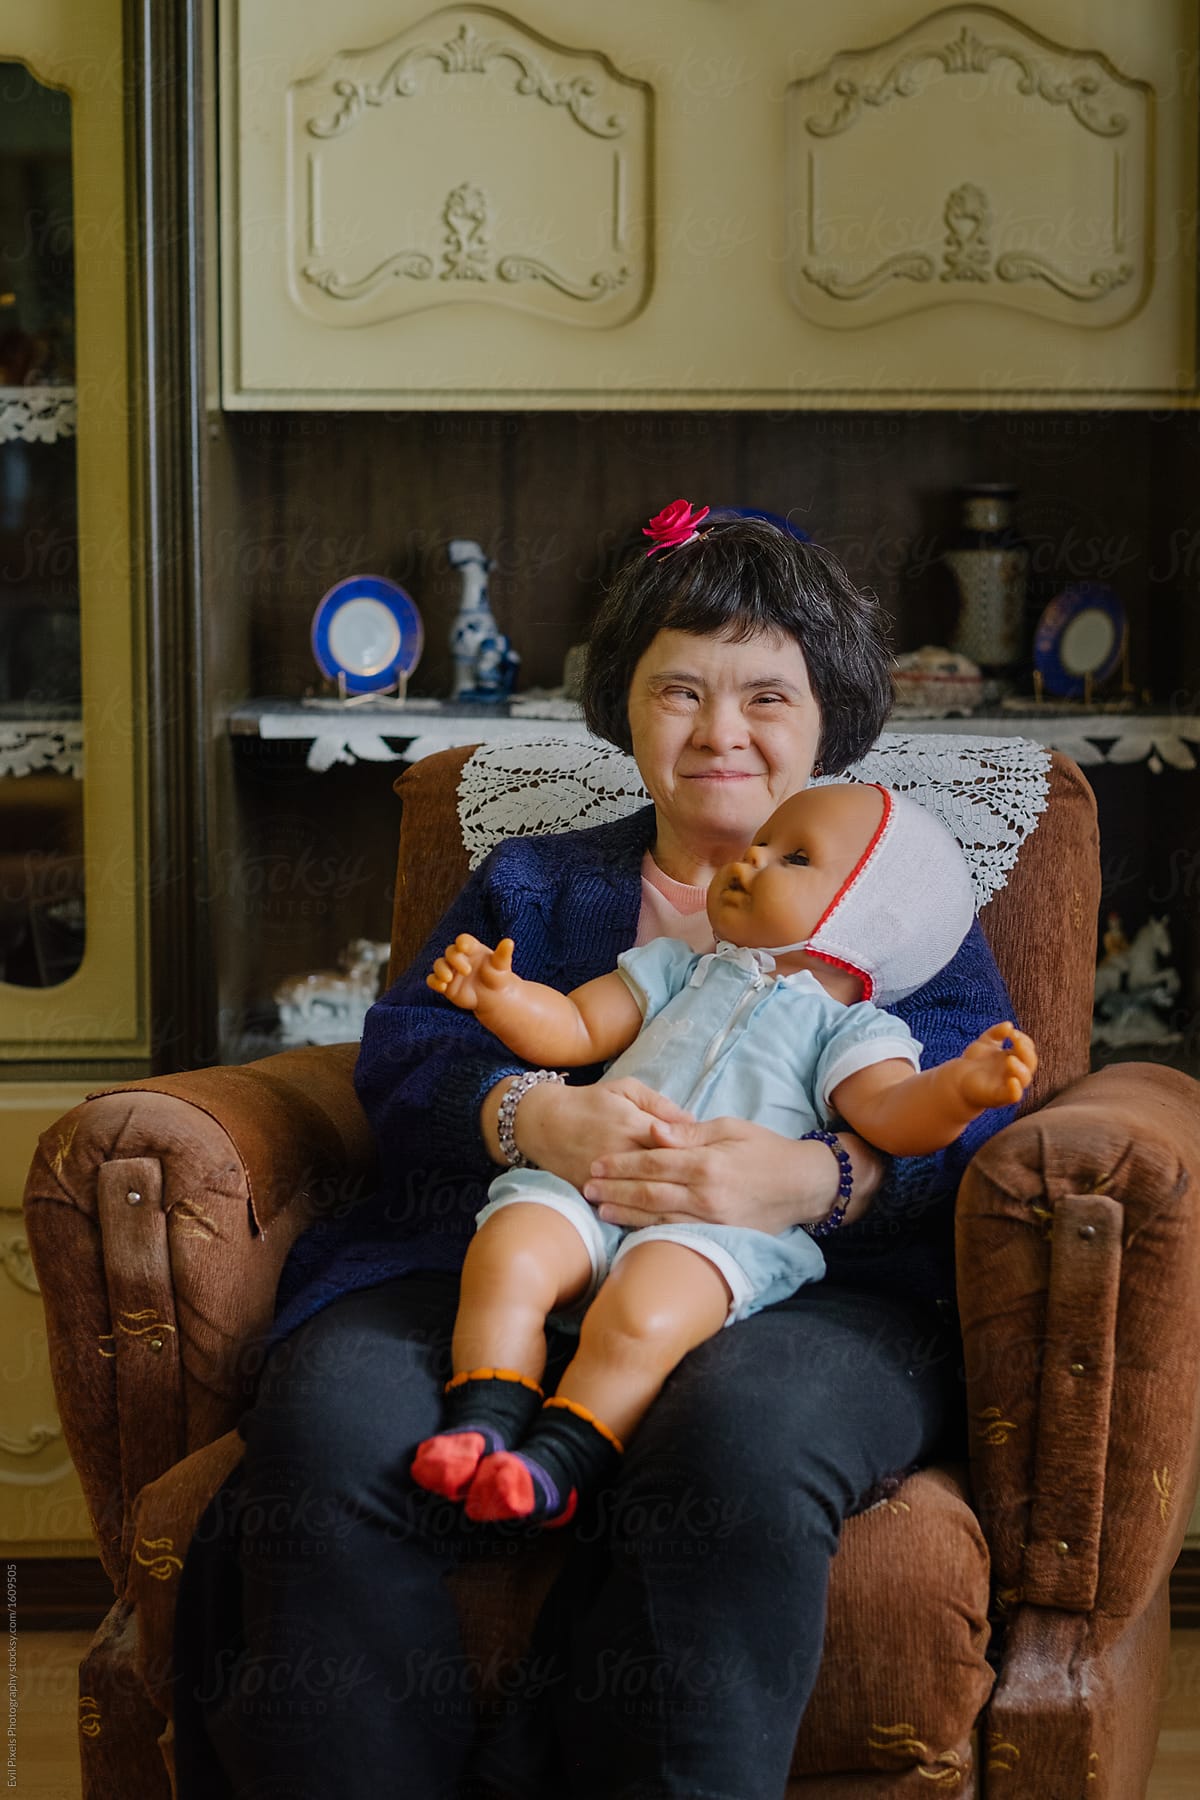 Woman With A Down Syndrome Holding A Doll